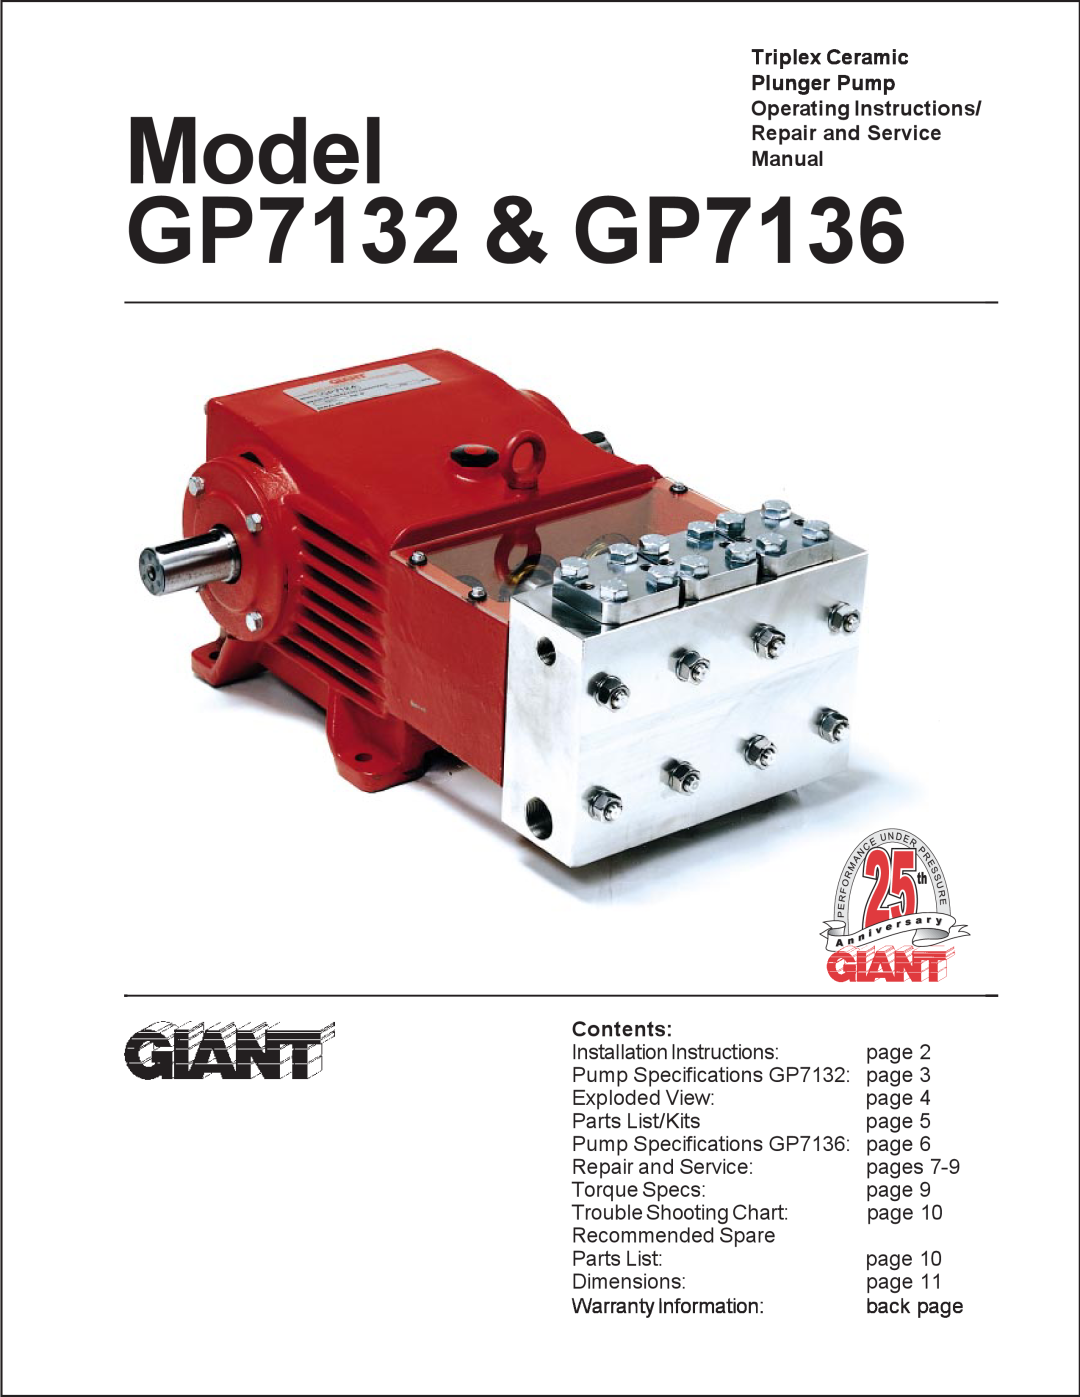 Giant GP7136 service manual Triplex Ceramic, Plunger Pump, Operating Instructions, Repair and Service, Manual, Contents 